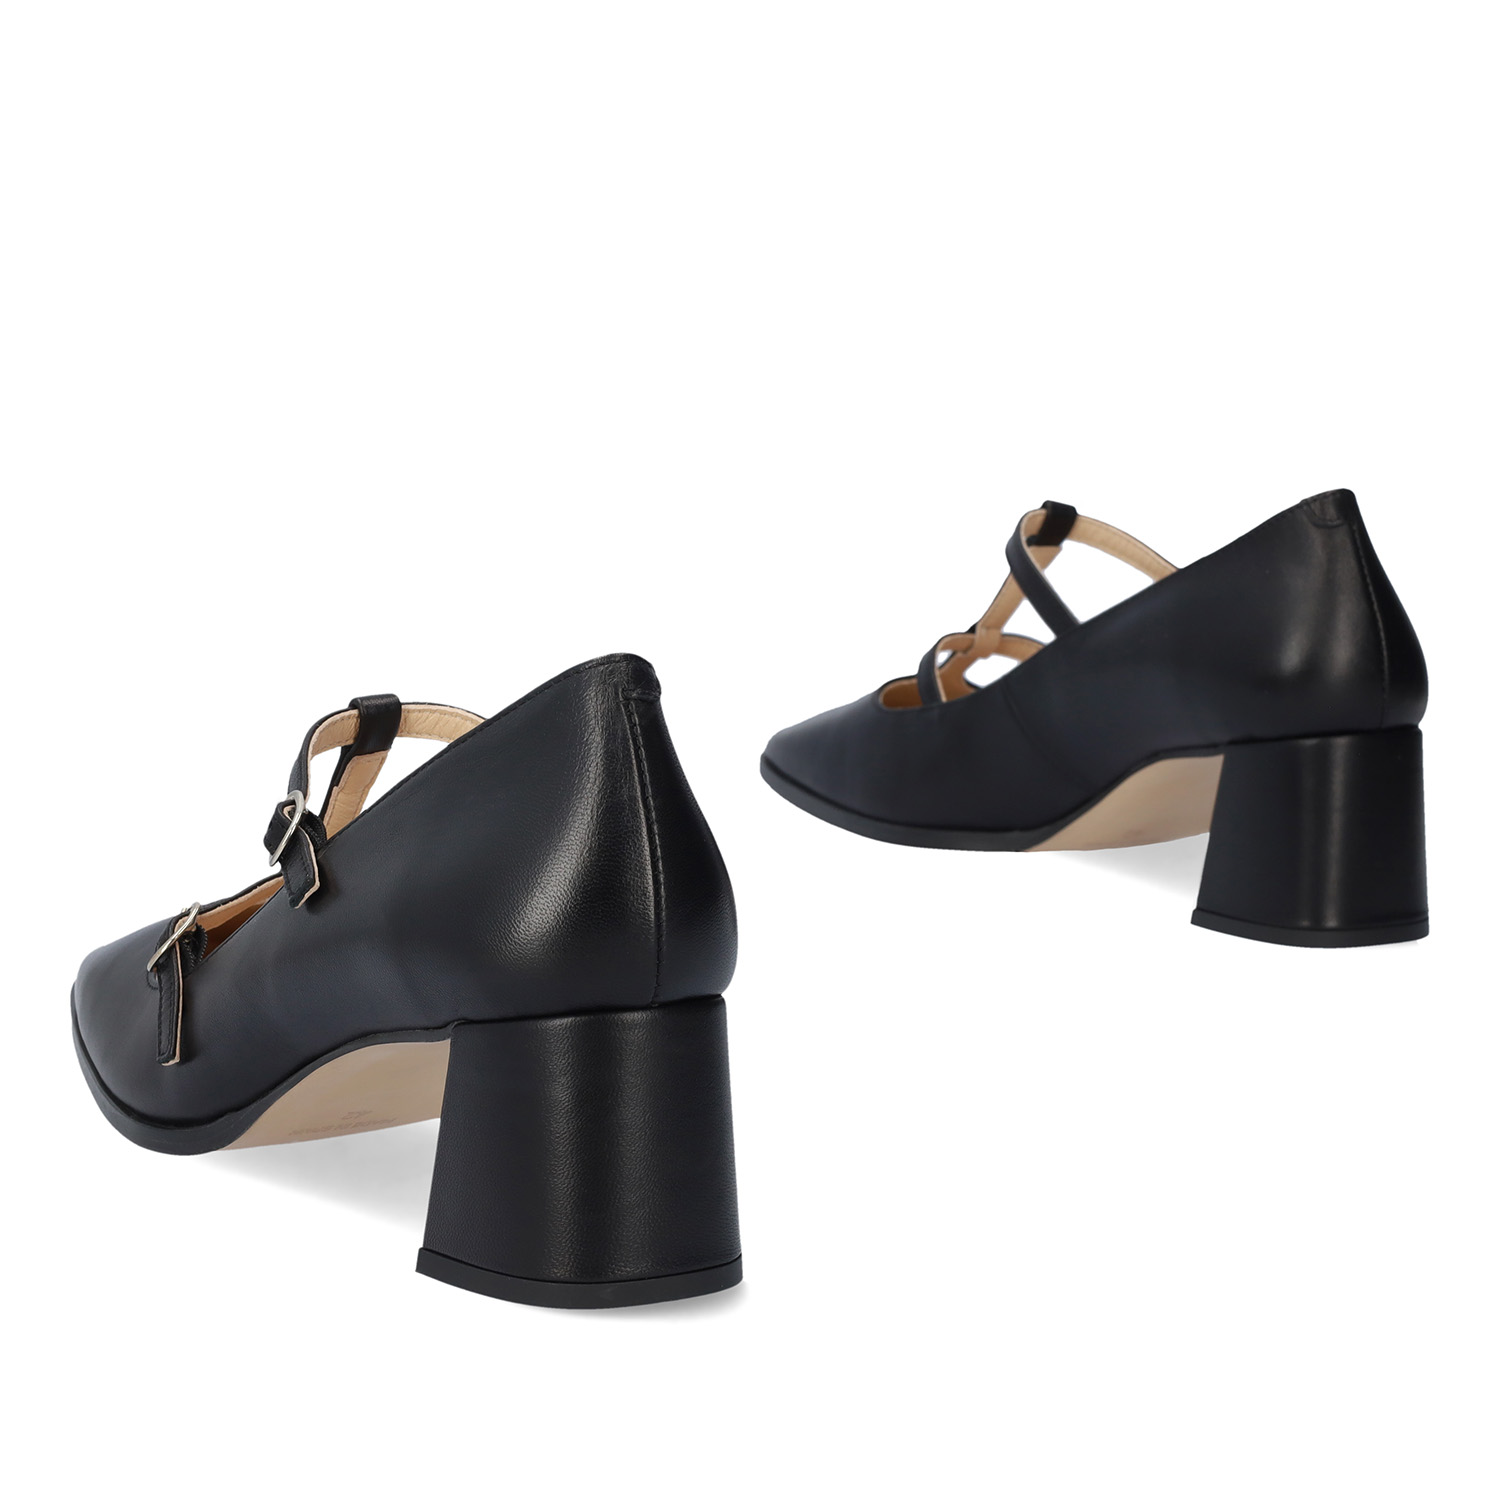 Court black leather heeled shoes. 